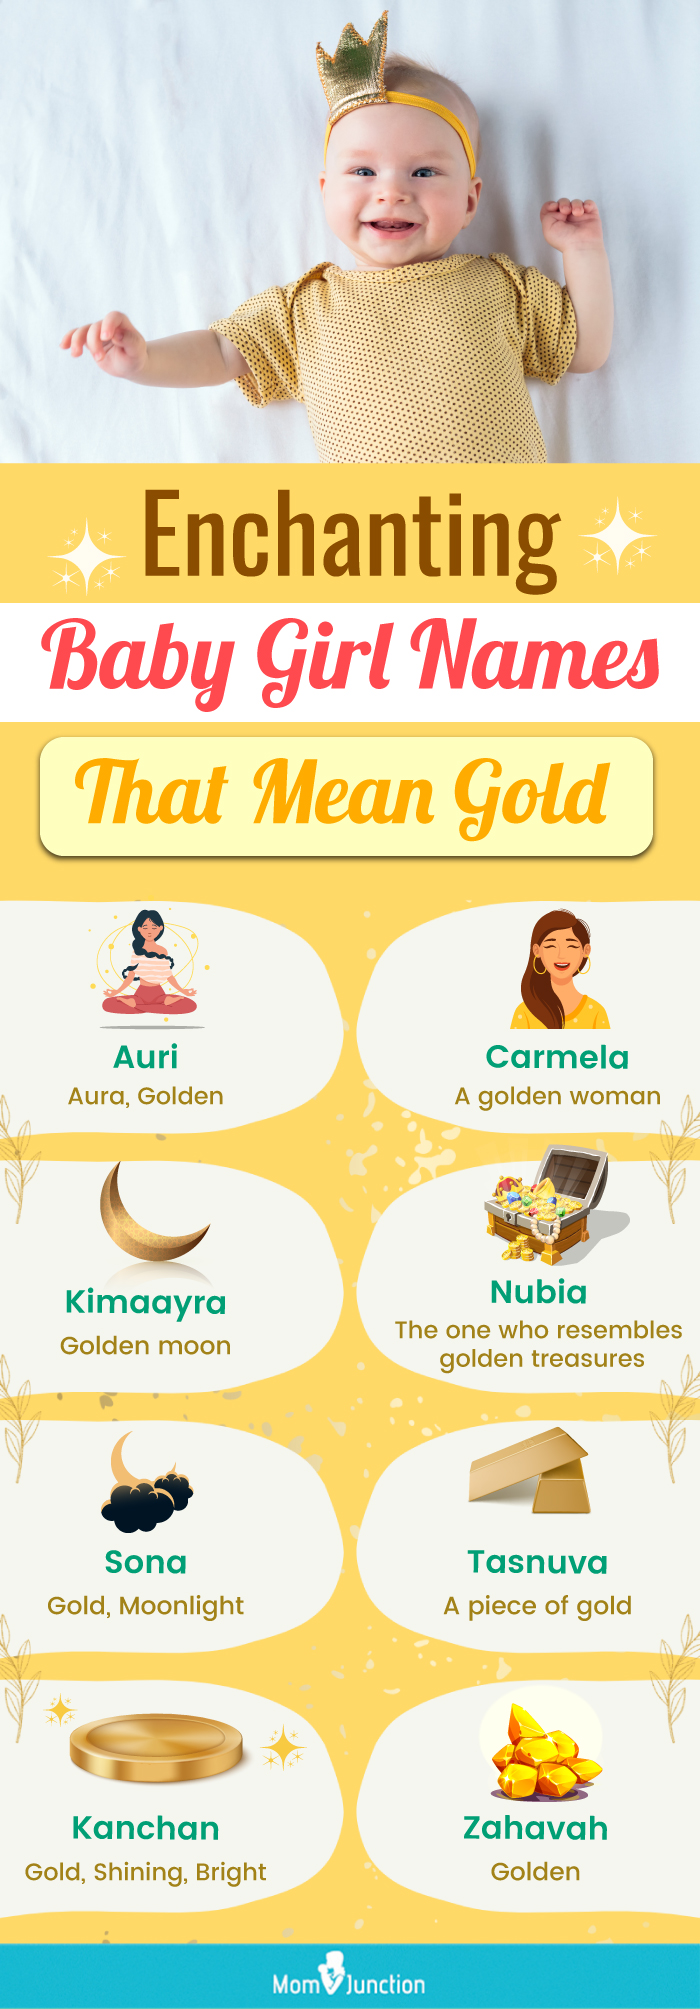 enchanting baby girl names that mean gold (infographic)